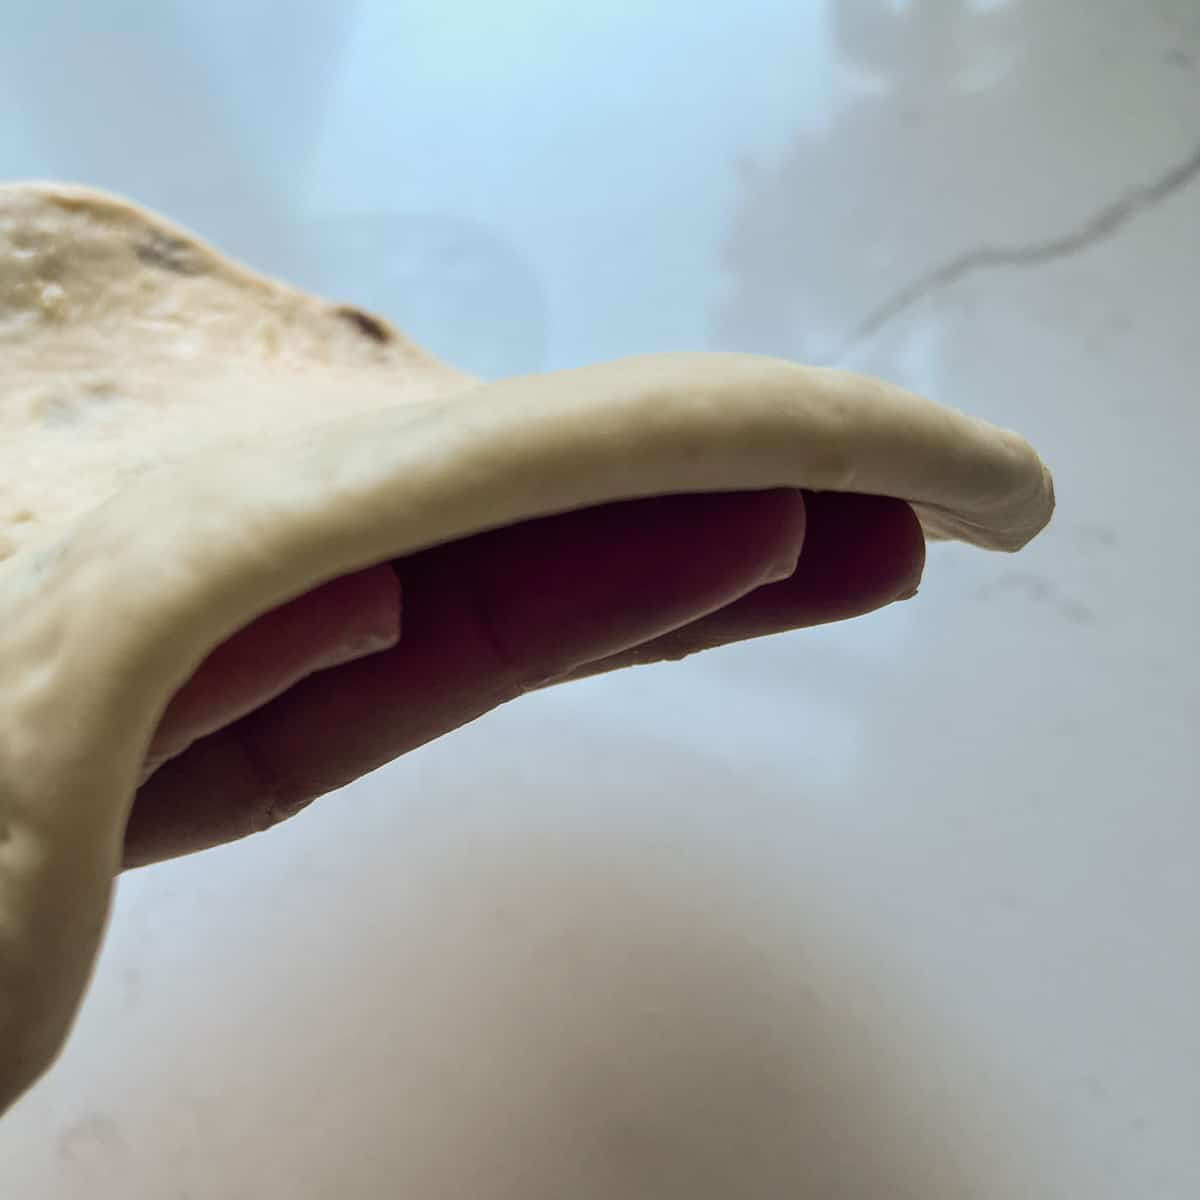 The thickness of the naan.